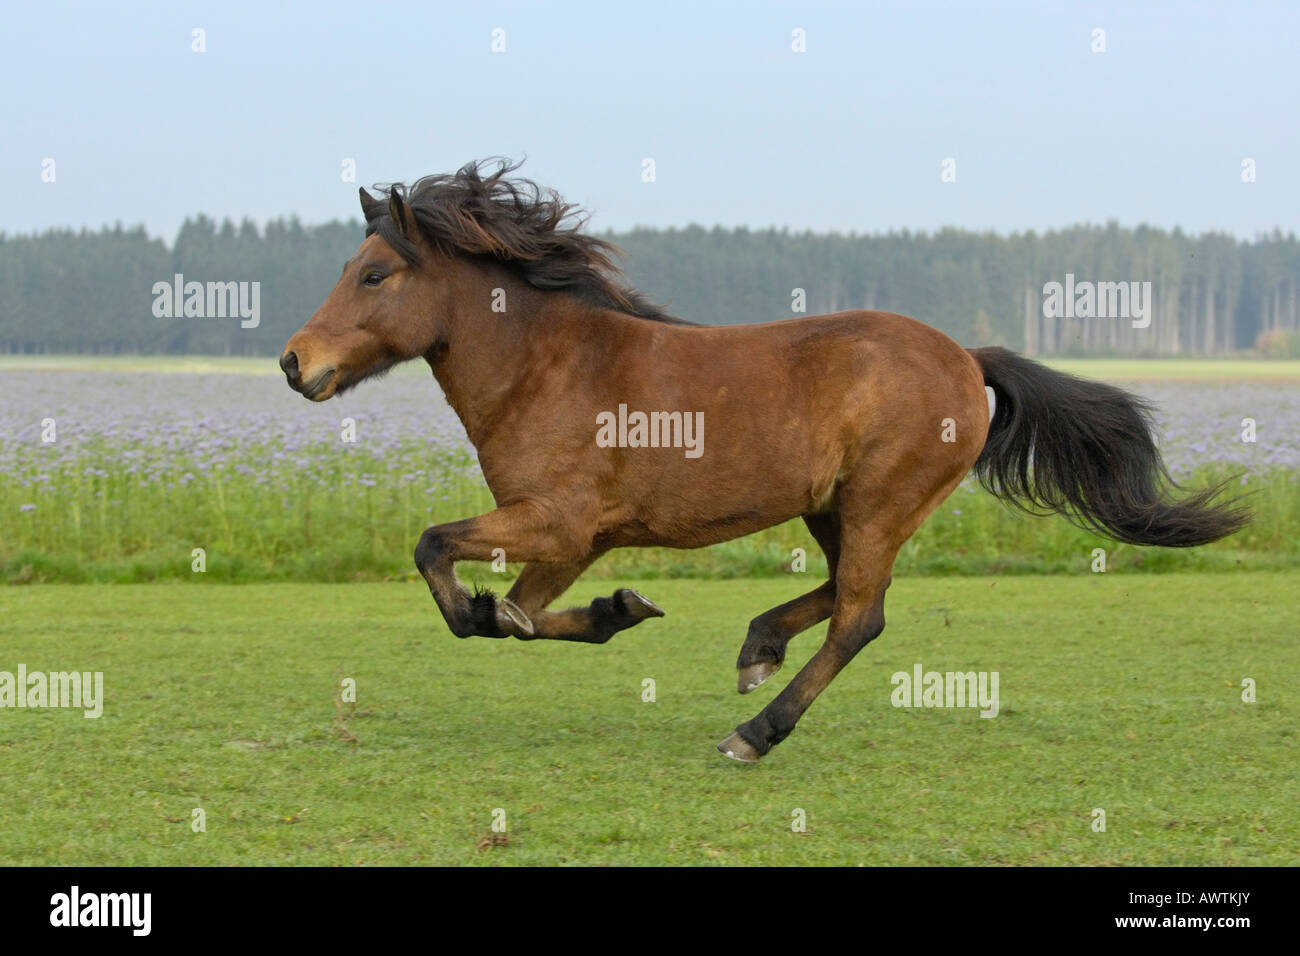 Galloping Icelandic horse in the paddock Stock Photo